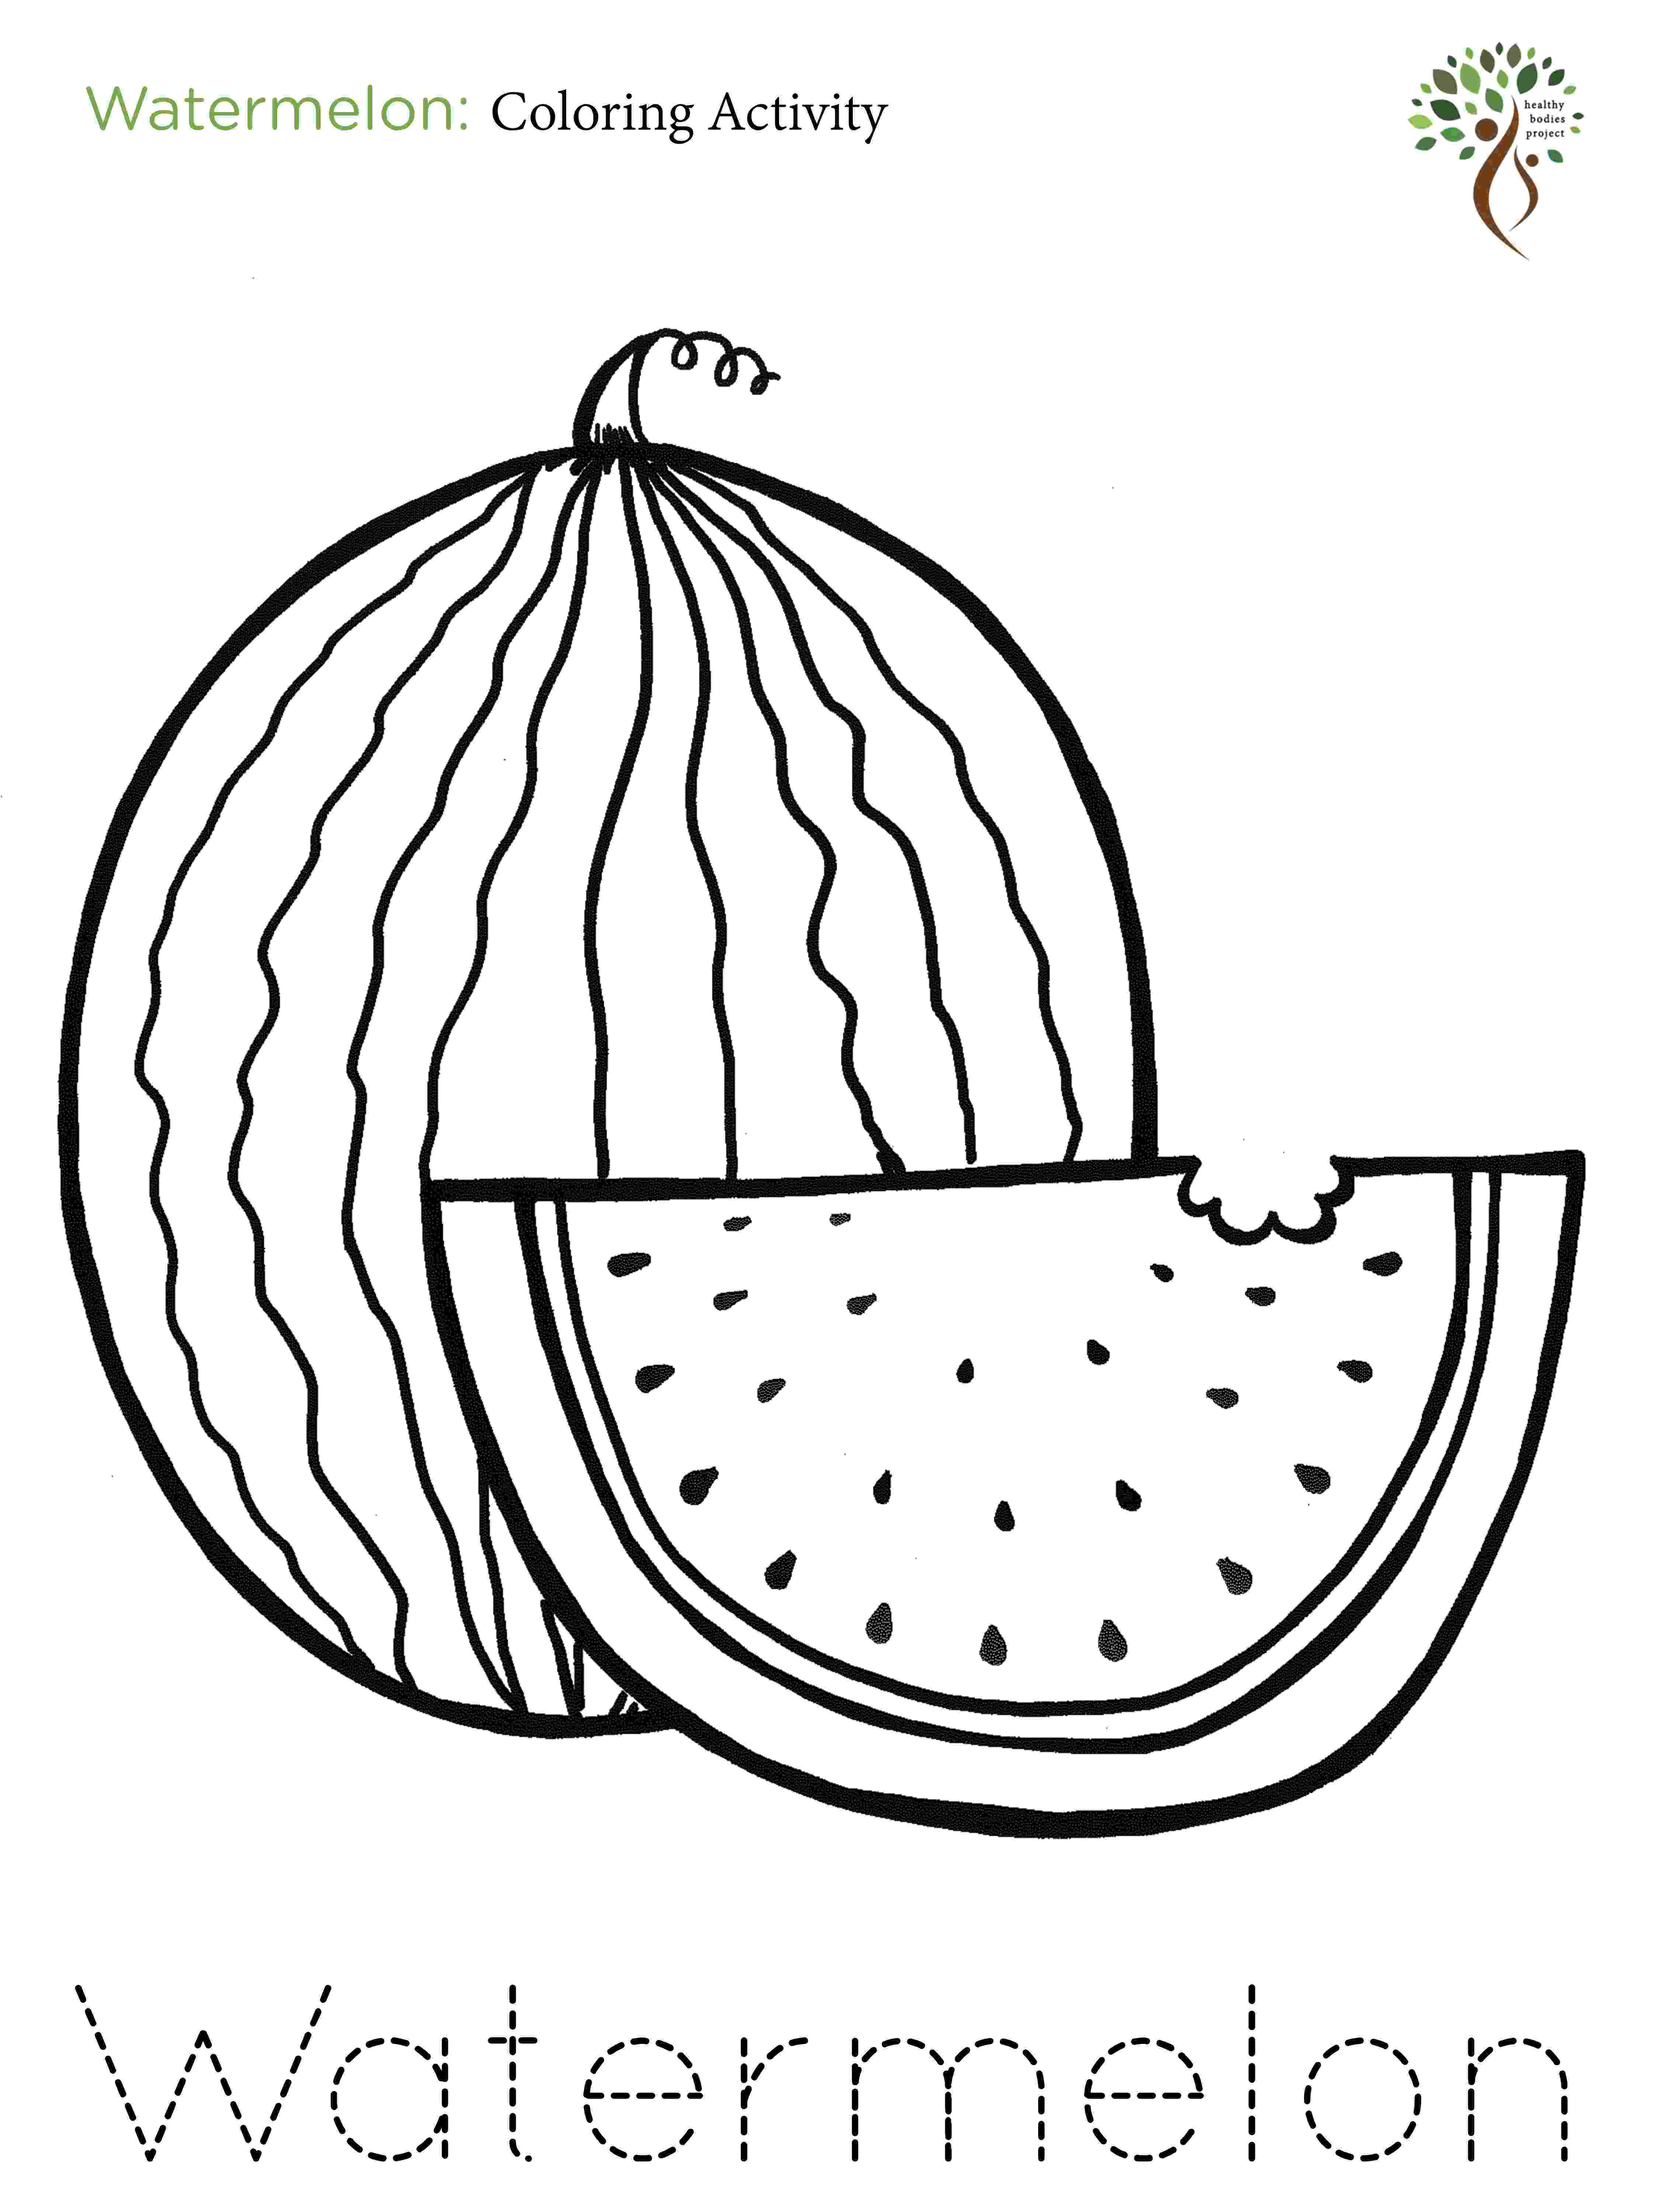 watermelon coloring pages watermelon coloring pages to download and print for free pages watermelon coloring 